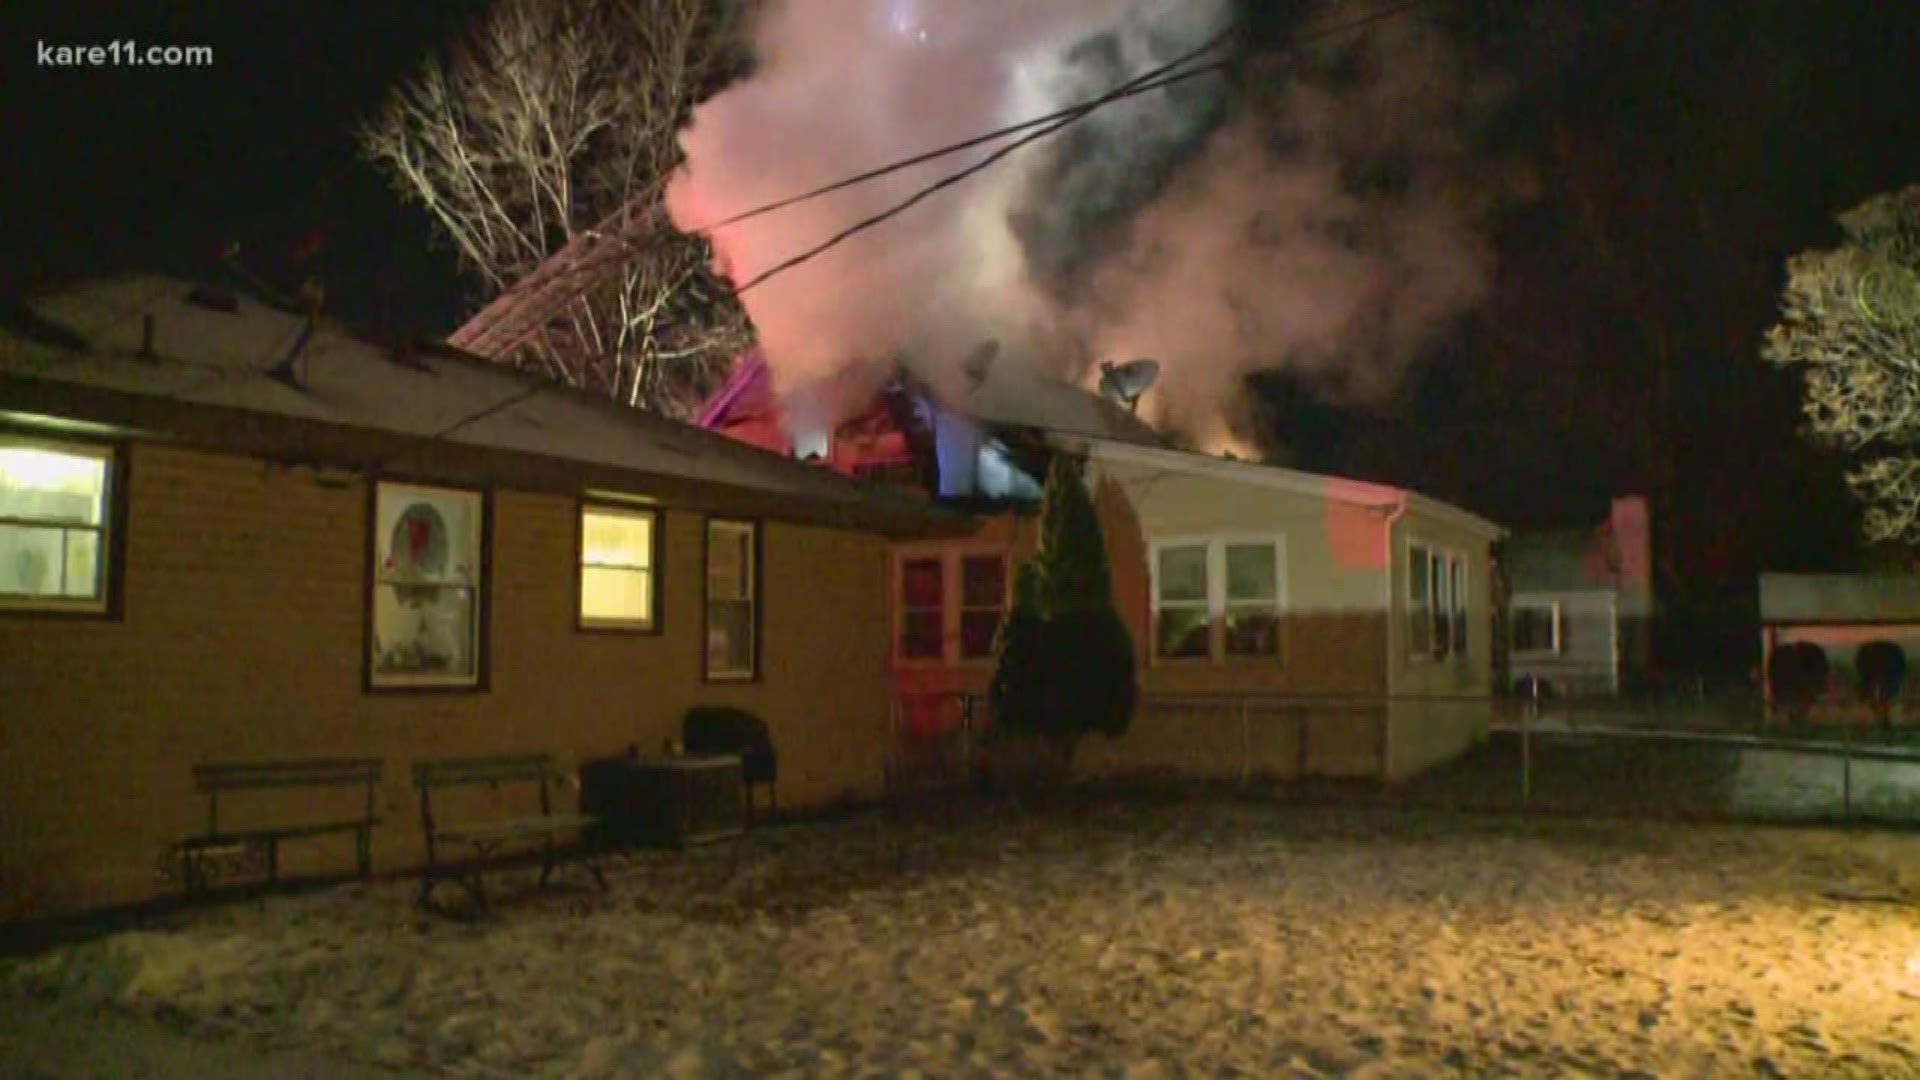 Crews were called to a house fire by Sheridan Ave and 51st Ave just after 12:30 a.m. on Christmas Eve. https://kare11.tv/2Cy7FjD